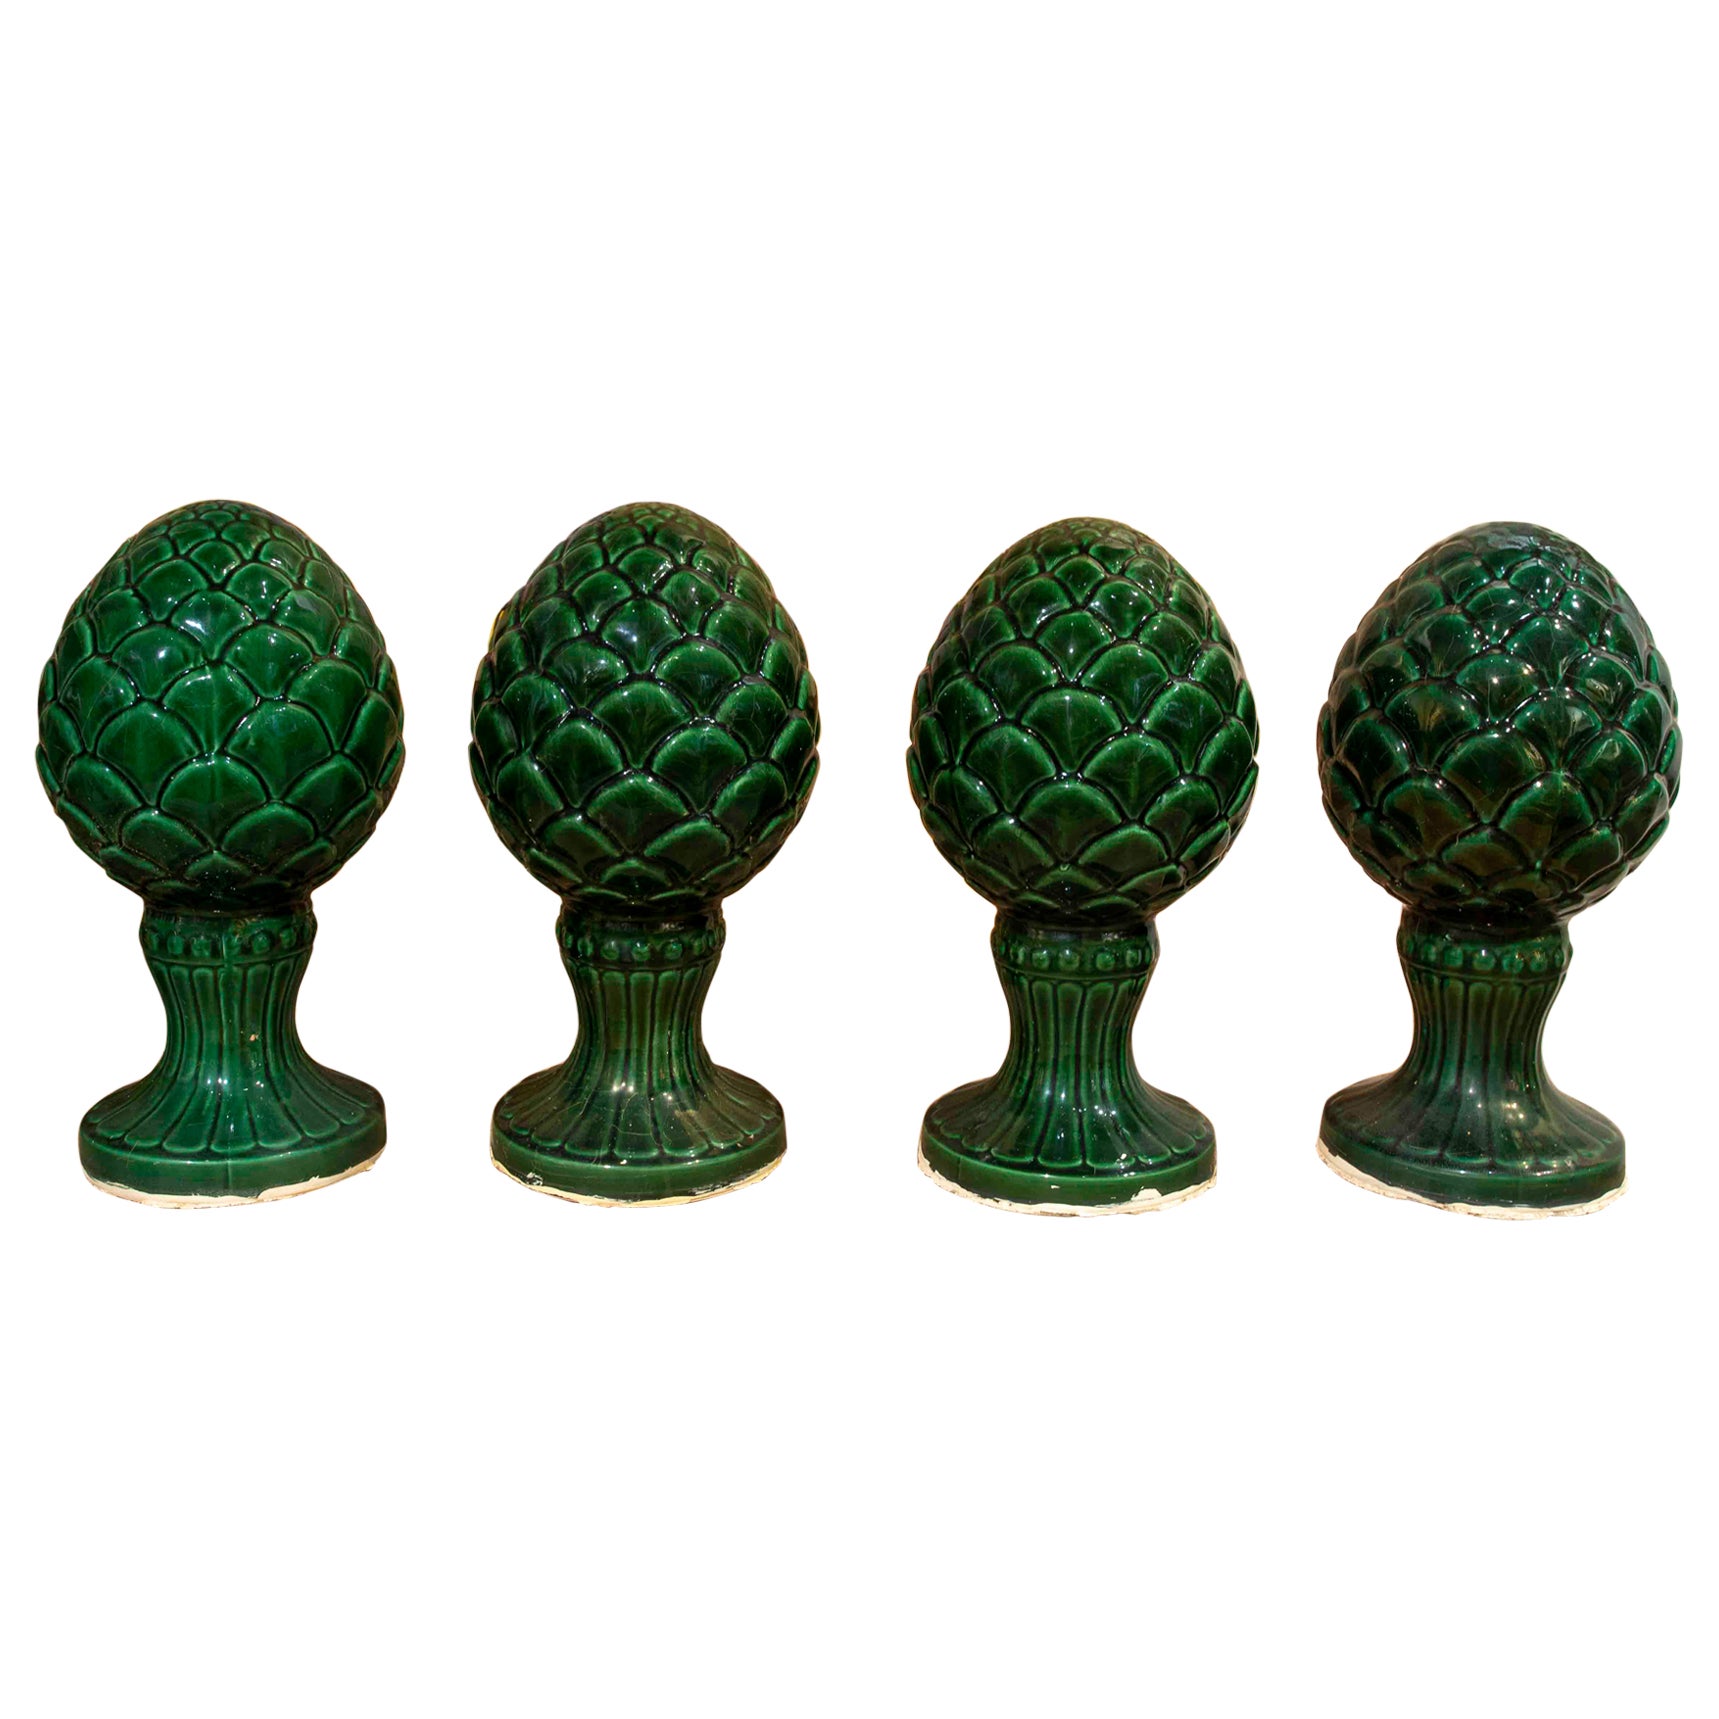 Set of Four Green Glazed Ceramic Finials in the Shape of Pineapples For Sale